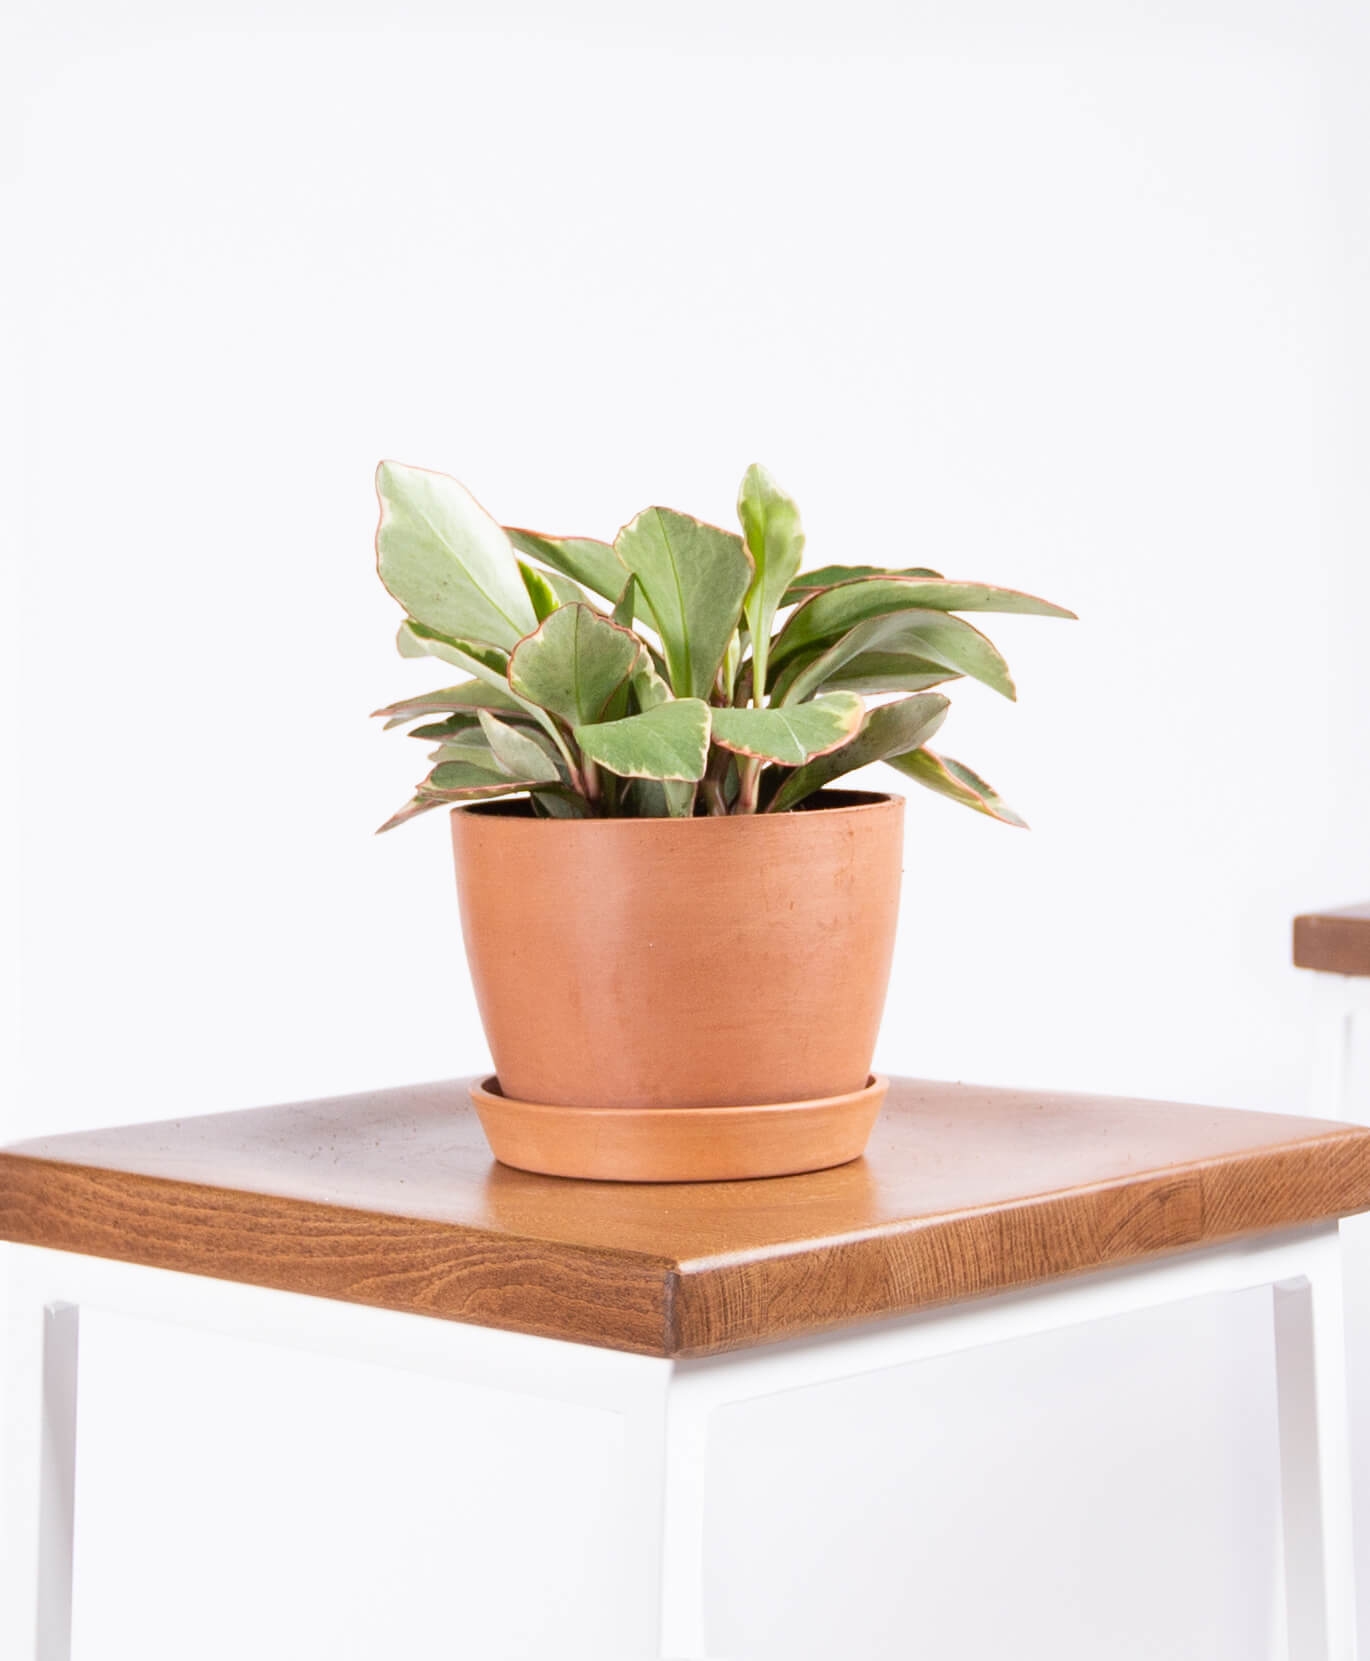 peperomia ginny with clay pot - Image 0